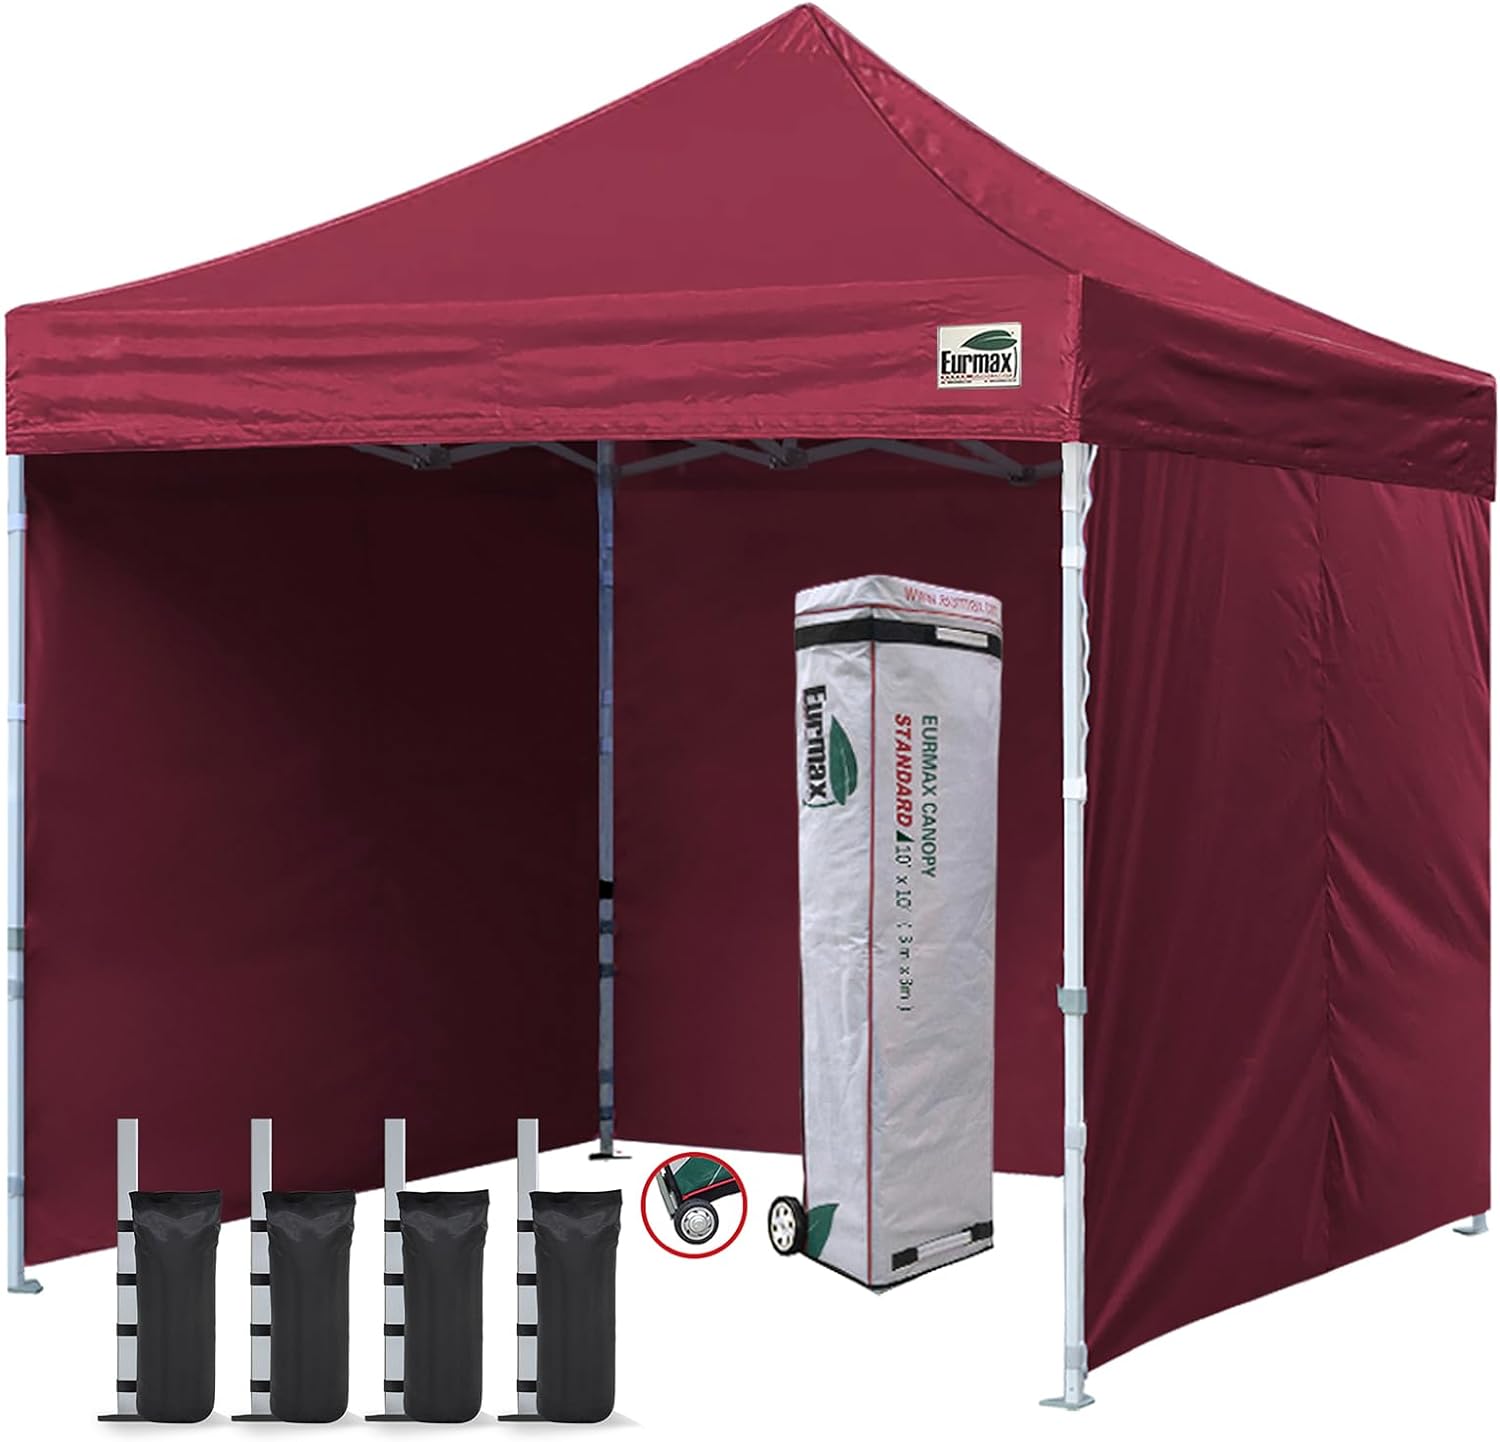 Eurmax USA 10'x10' Ez Pop-up Canopy Tent Commercial Instant Canopies - $140